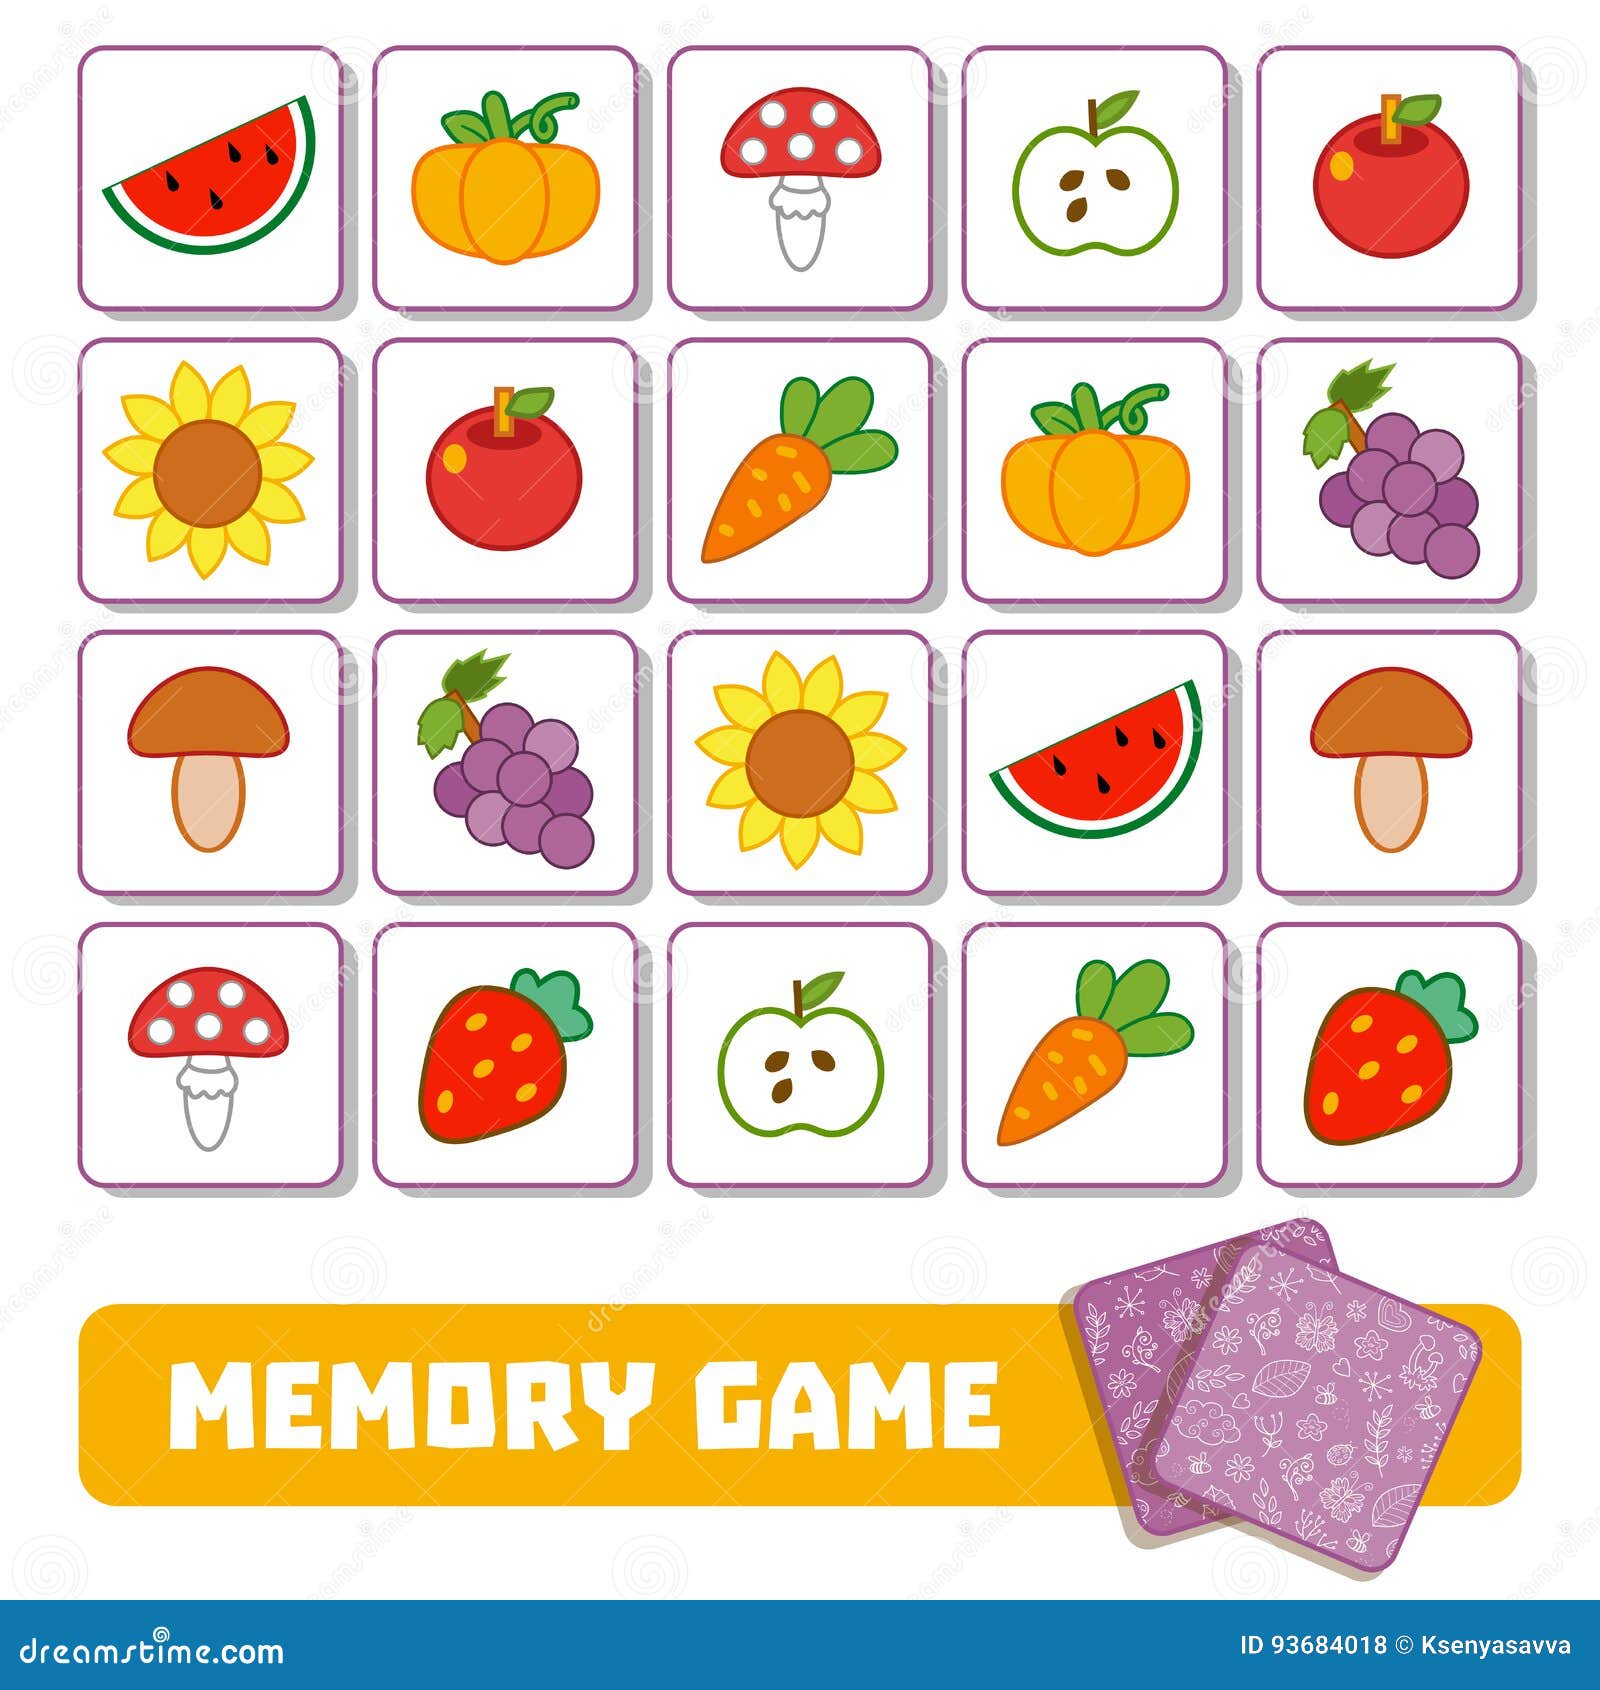 memory game for children, cards with fruits and vegetables